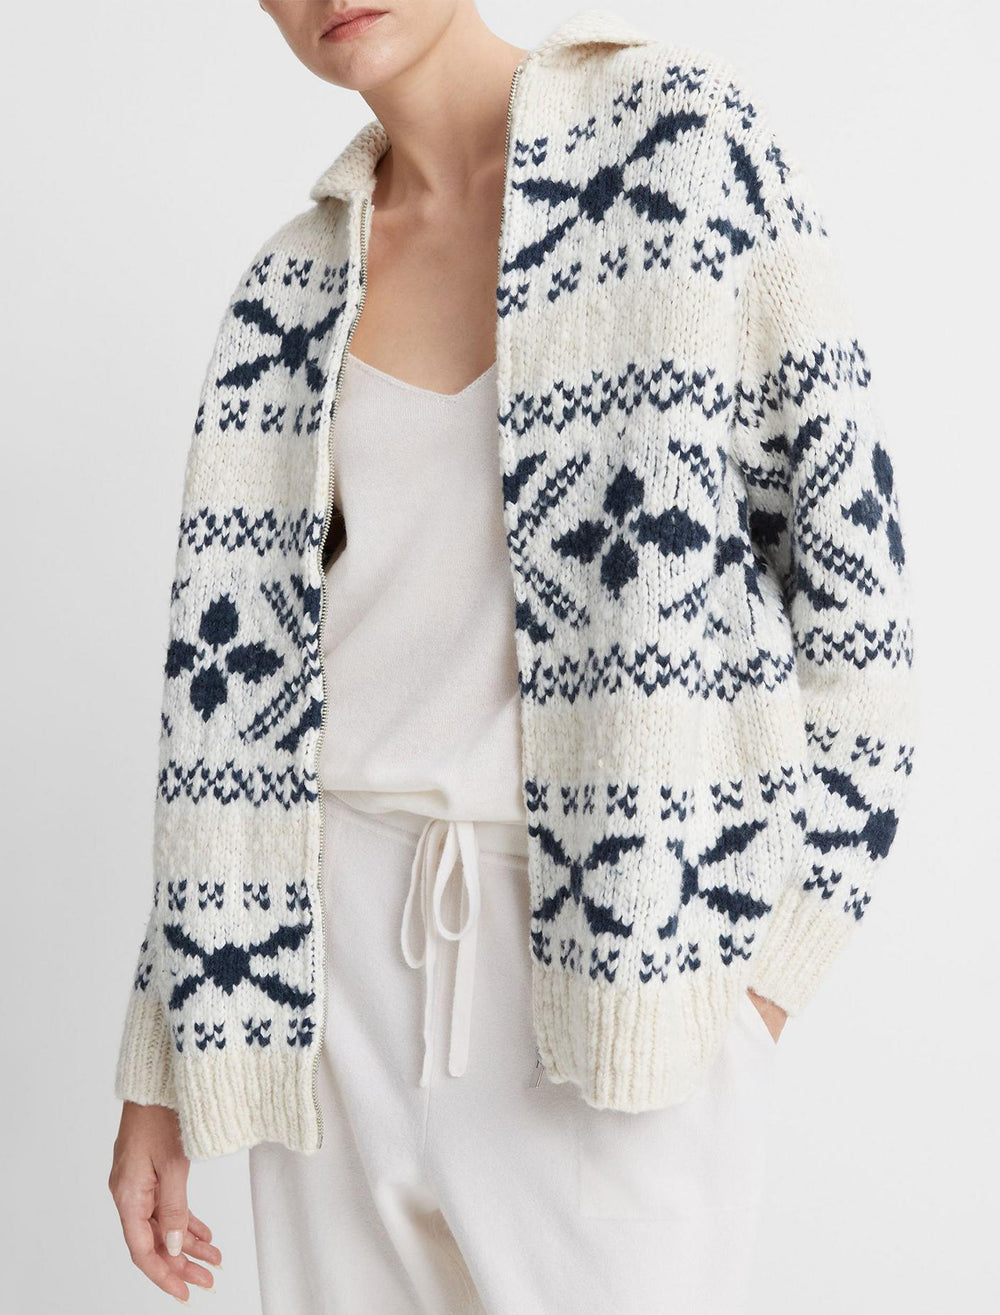 Model wearing Vince's nordic fair isle cardigan in light sand and coastal blue.